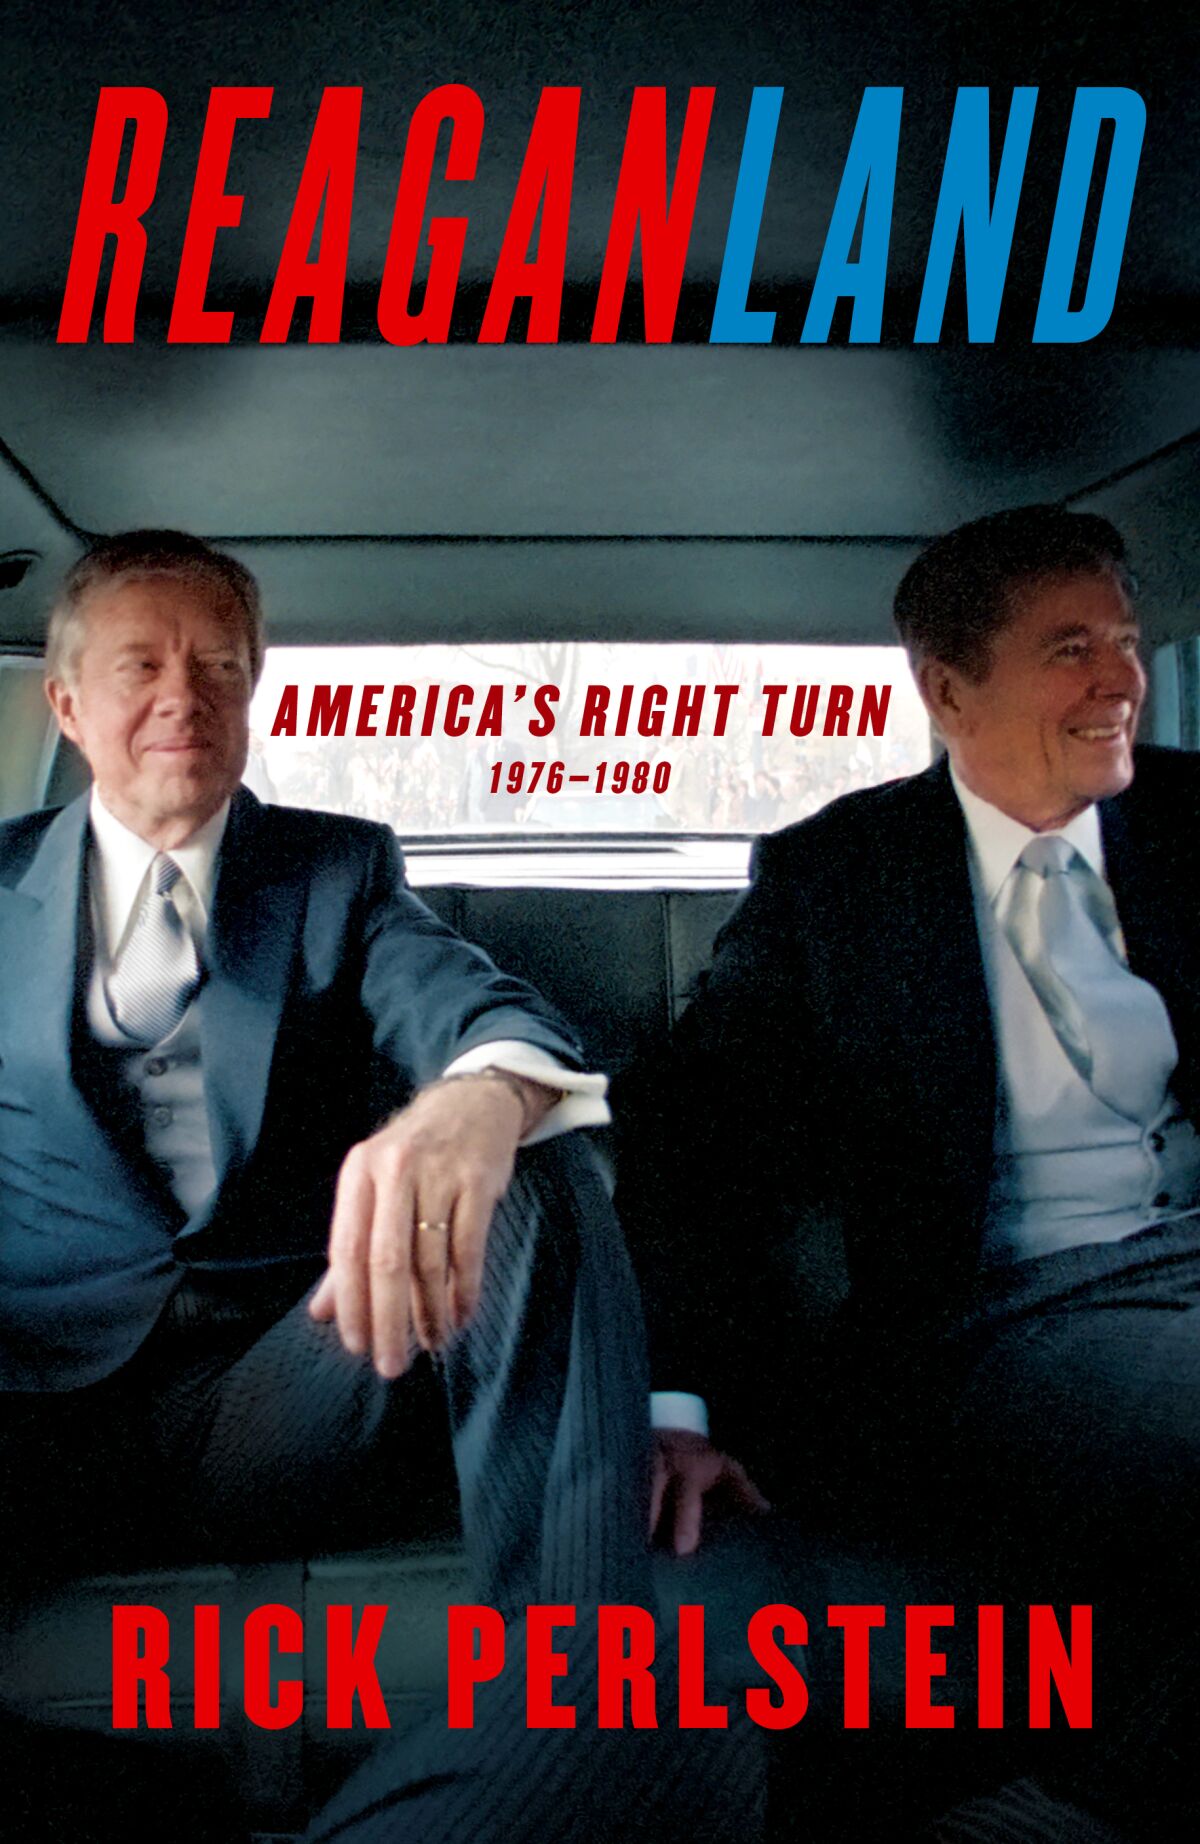 Book jacket for "Reaganland: America's Right Turn 1976-1980" by Rick Perlstein